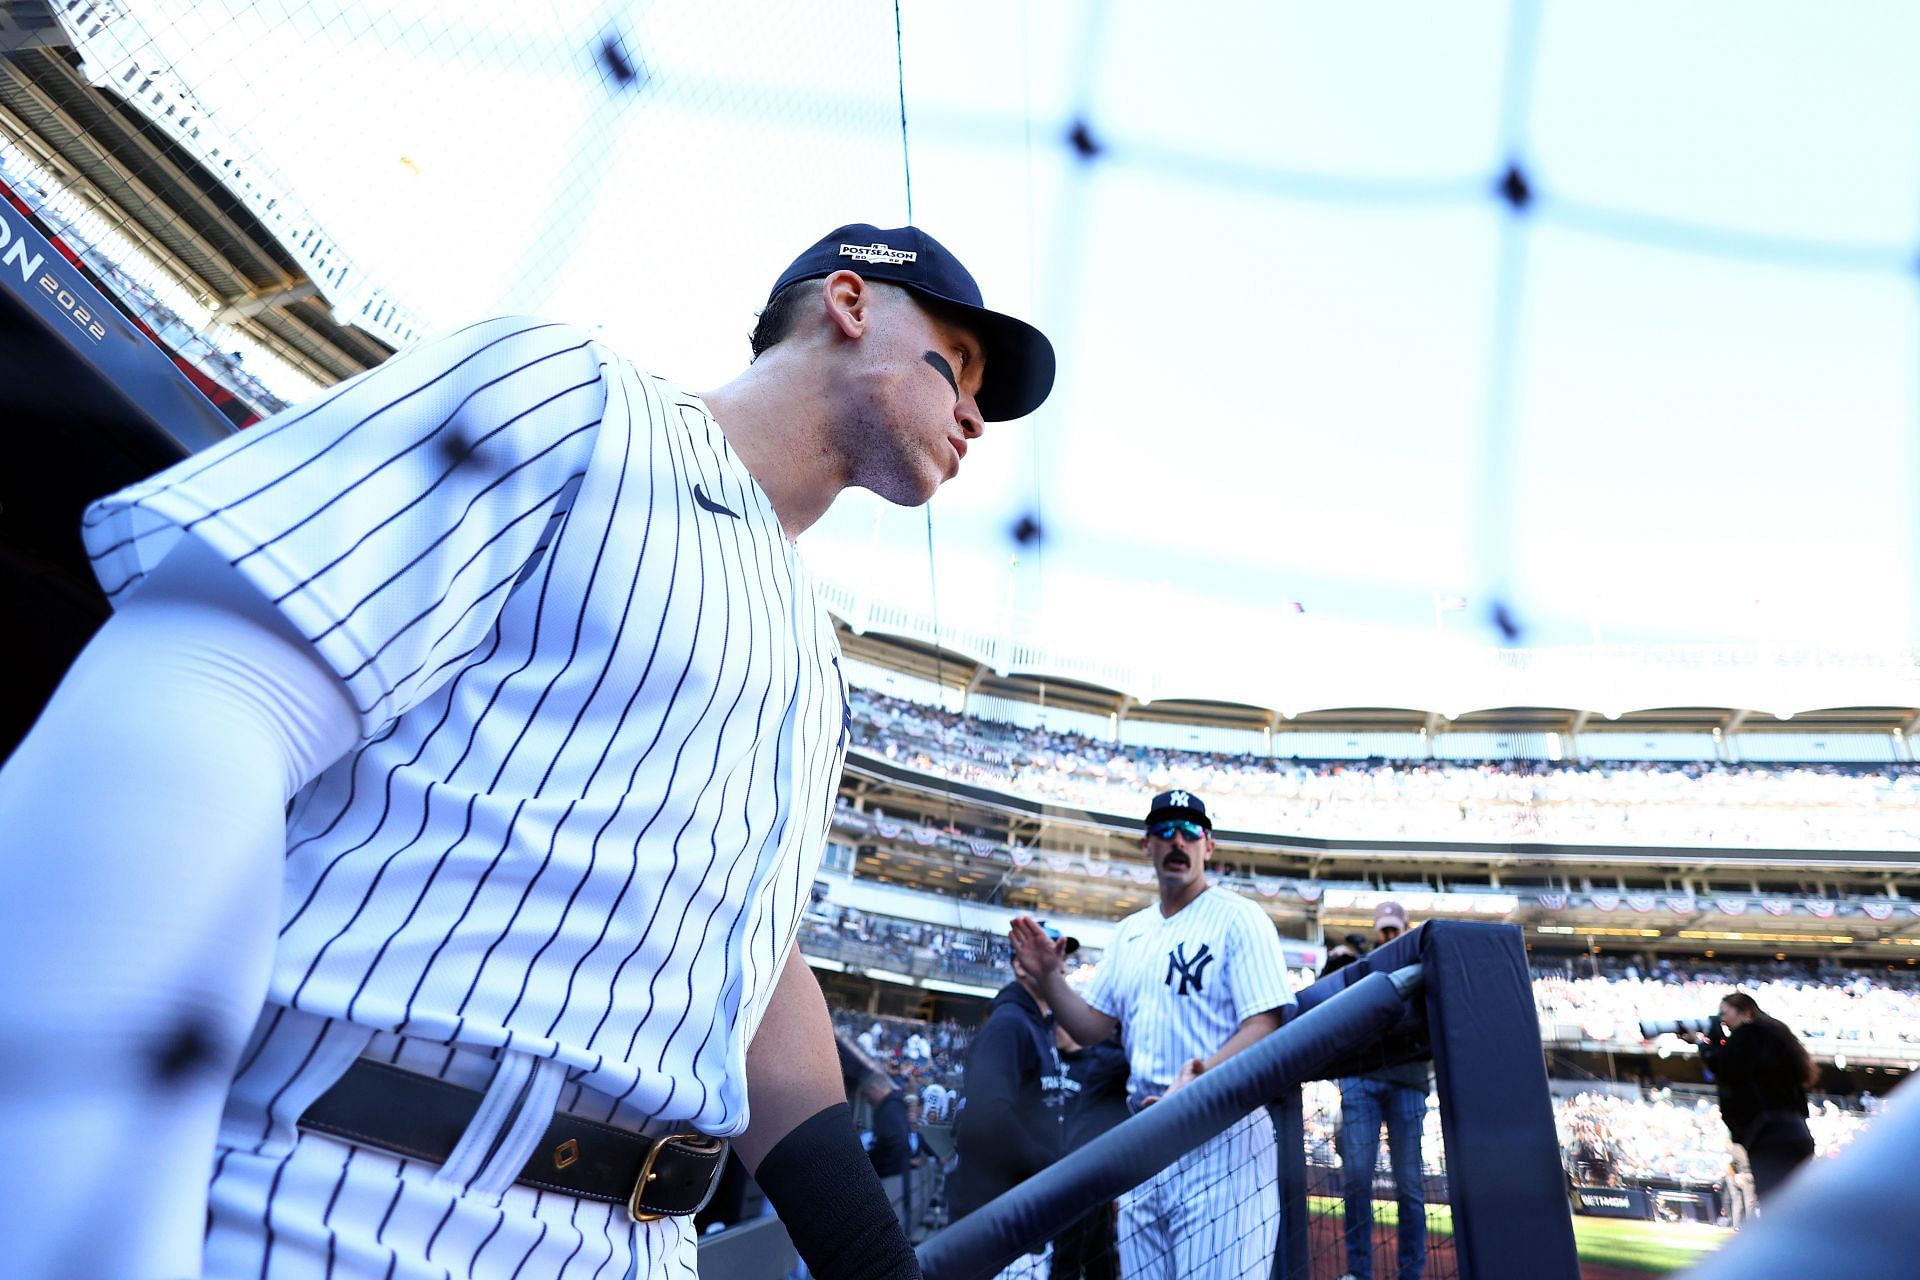 Yankees' Aaron Judge bet on himself, and so far, it's paying off big for new  contract